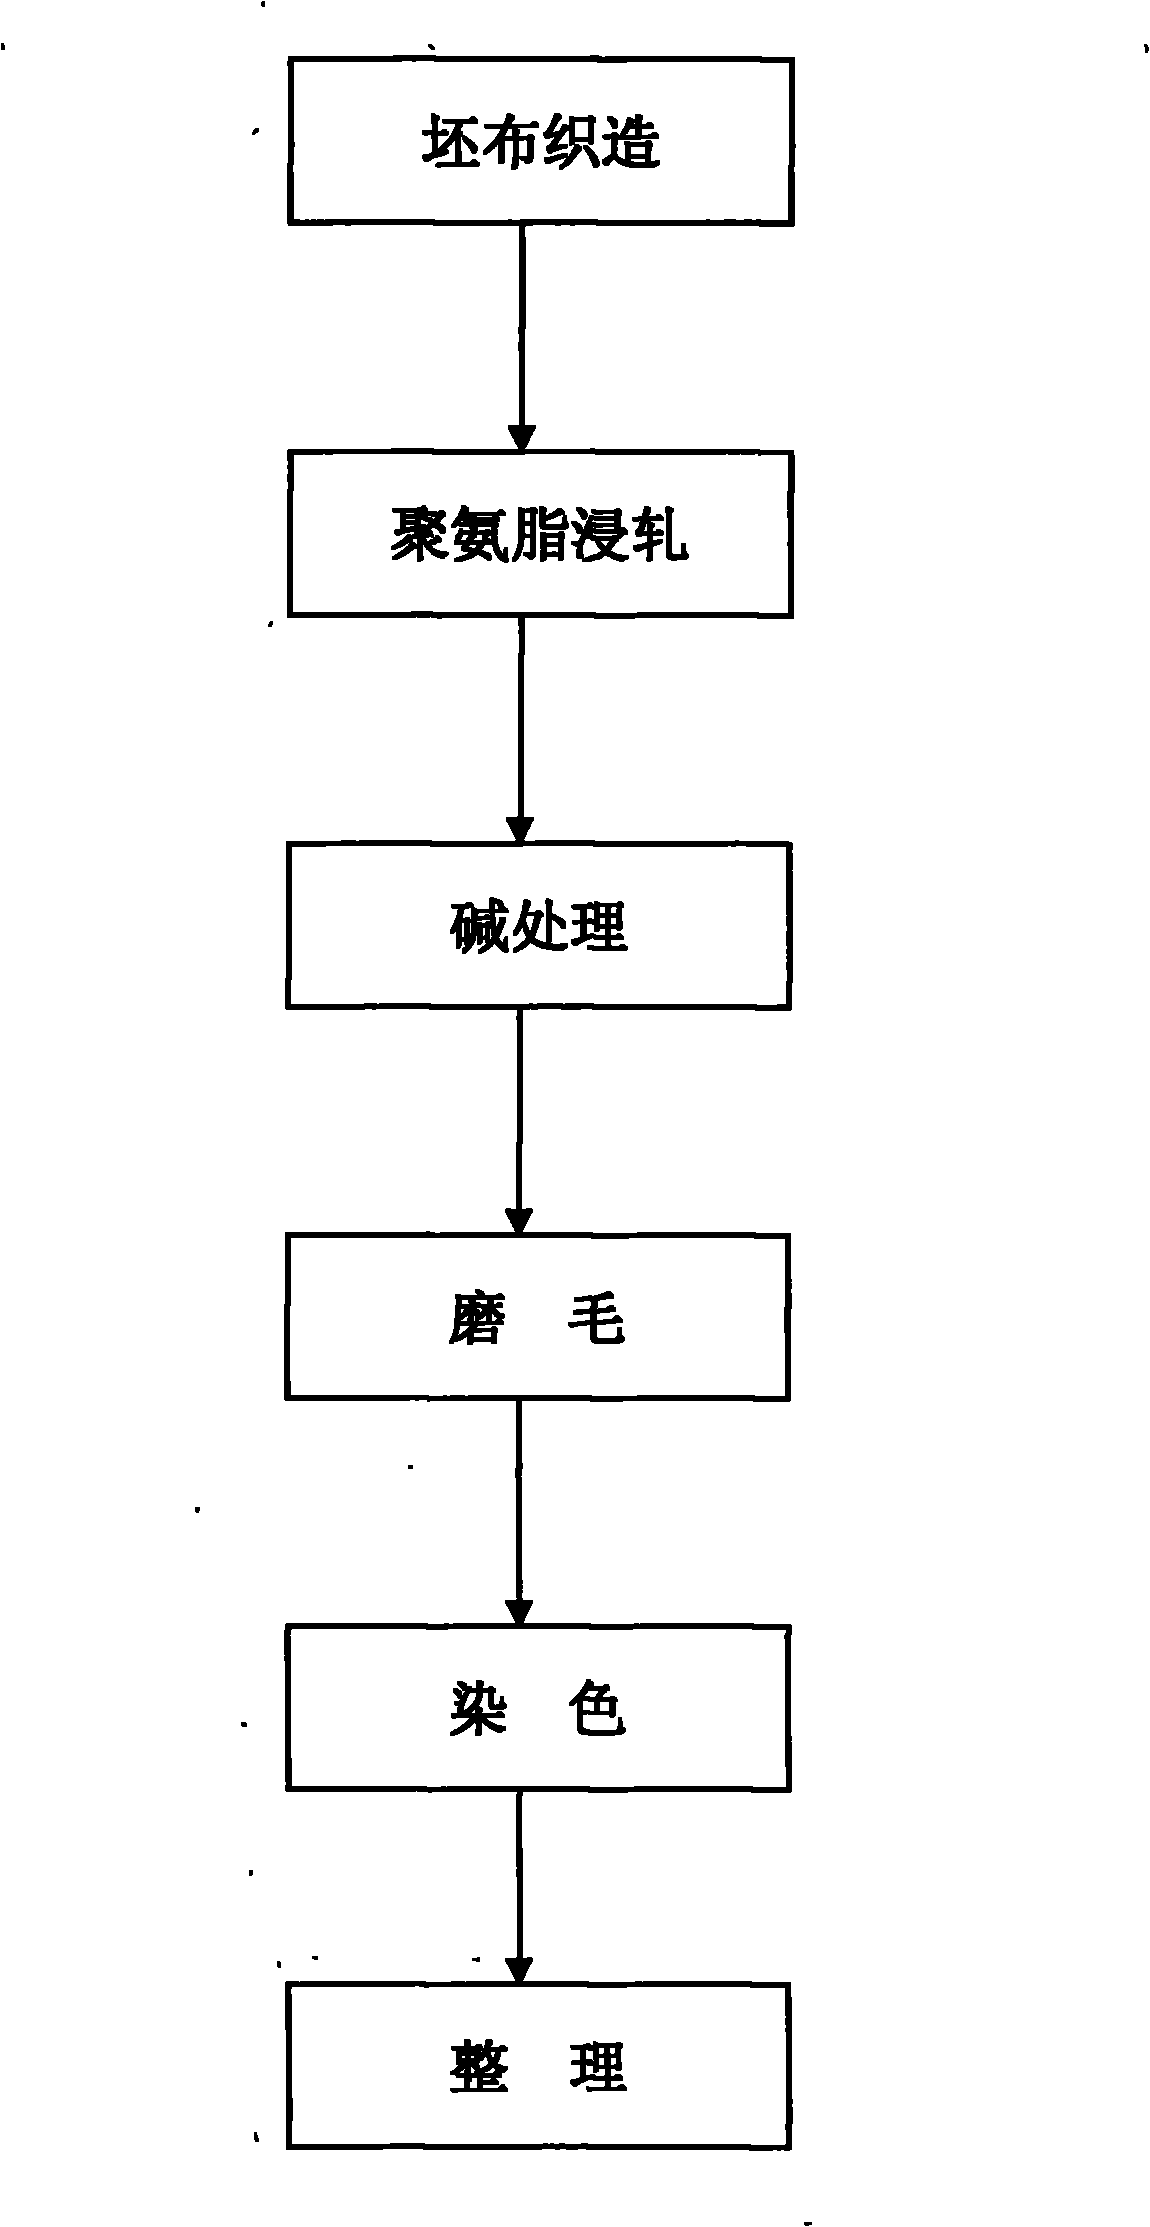 Superfine fiber artificial leather and manufacturing method thereof